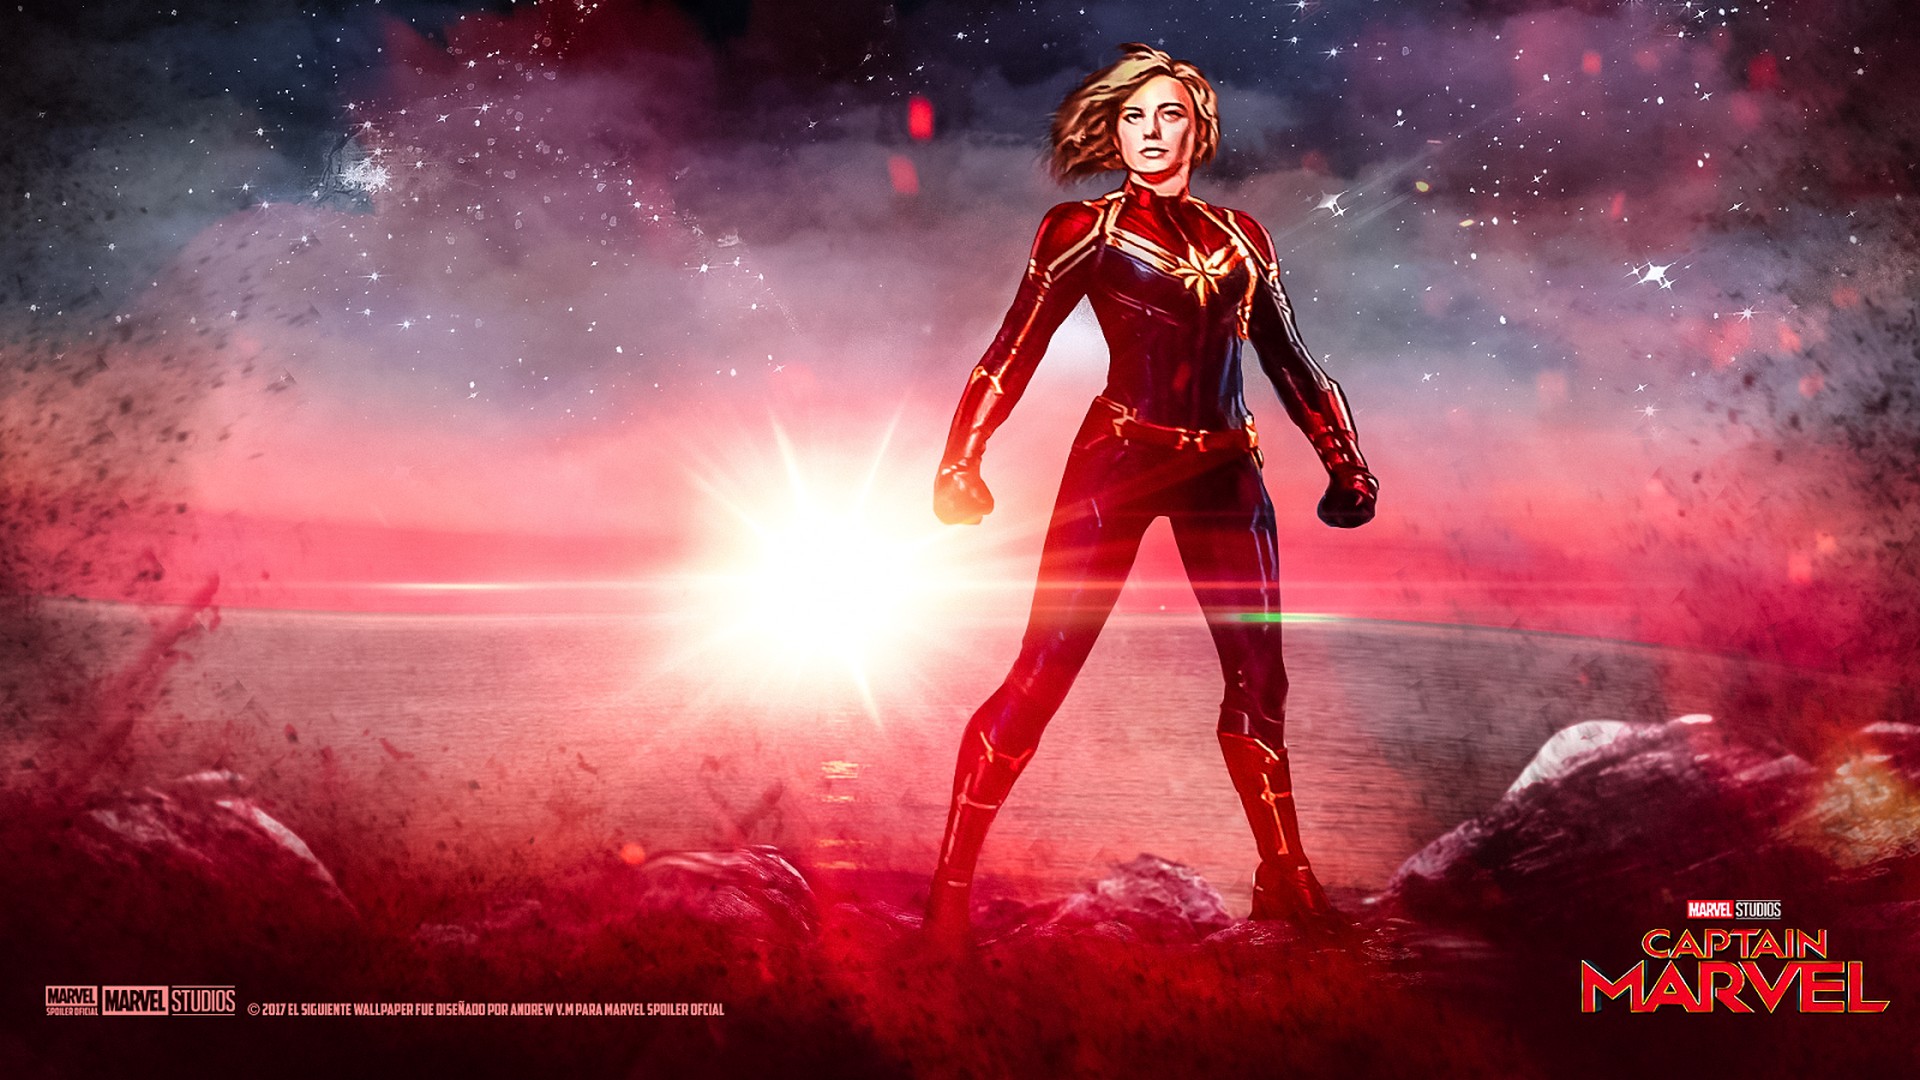 Wallpapers Captain Marvel with high-resolution 1920x1080 pixel. You can use this poster wallpaper for your Desktop Computers, Mac Screensavers, Windows Backgrounds, iPhone Wallpapers, Tablet or Android Lock screen and another Mobile device